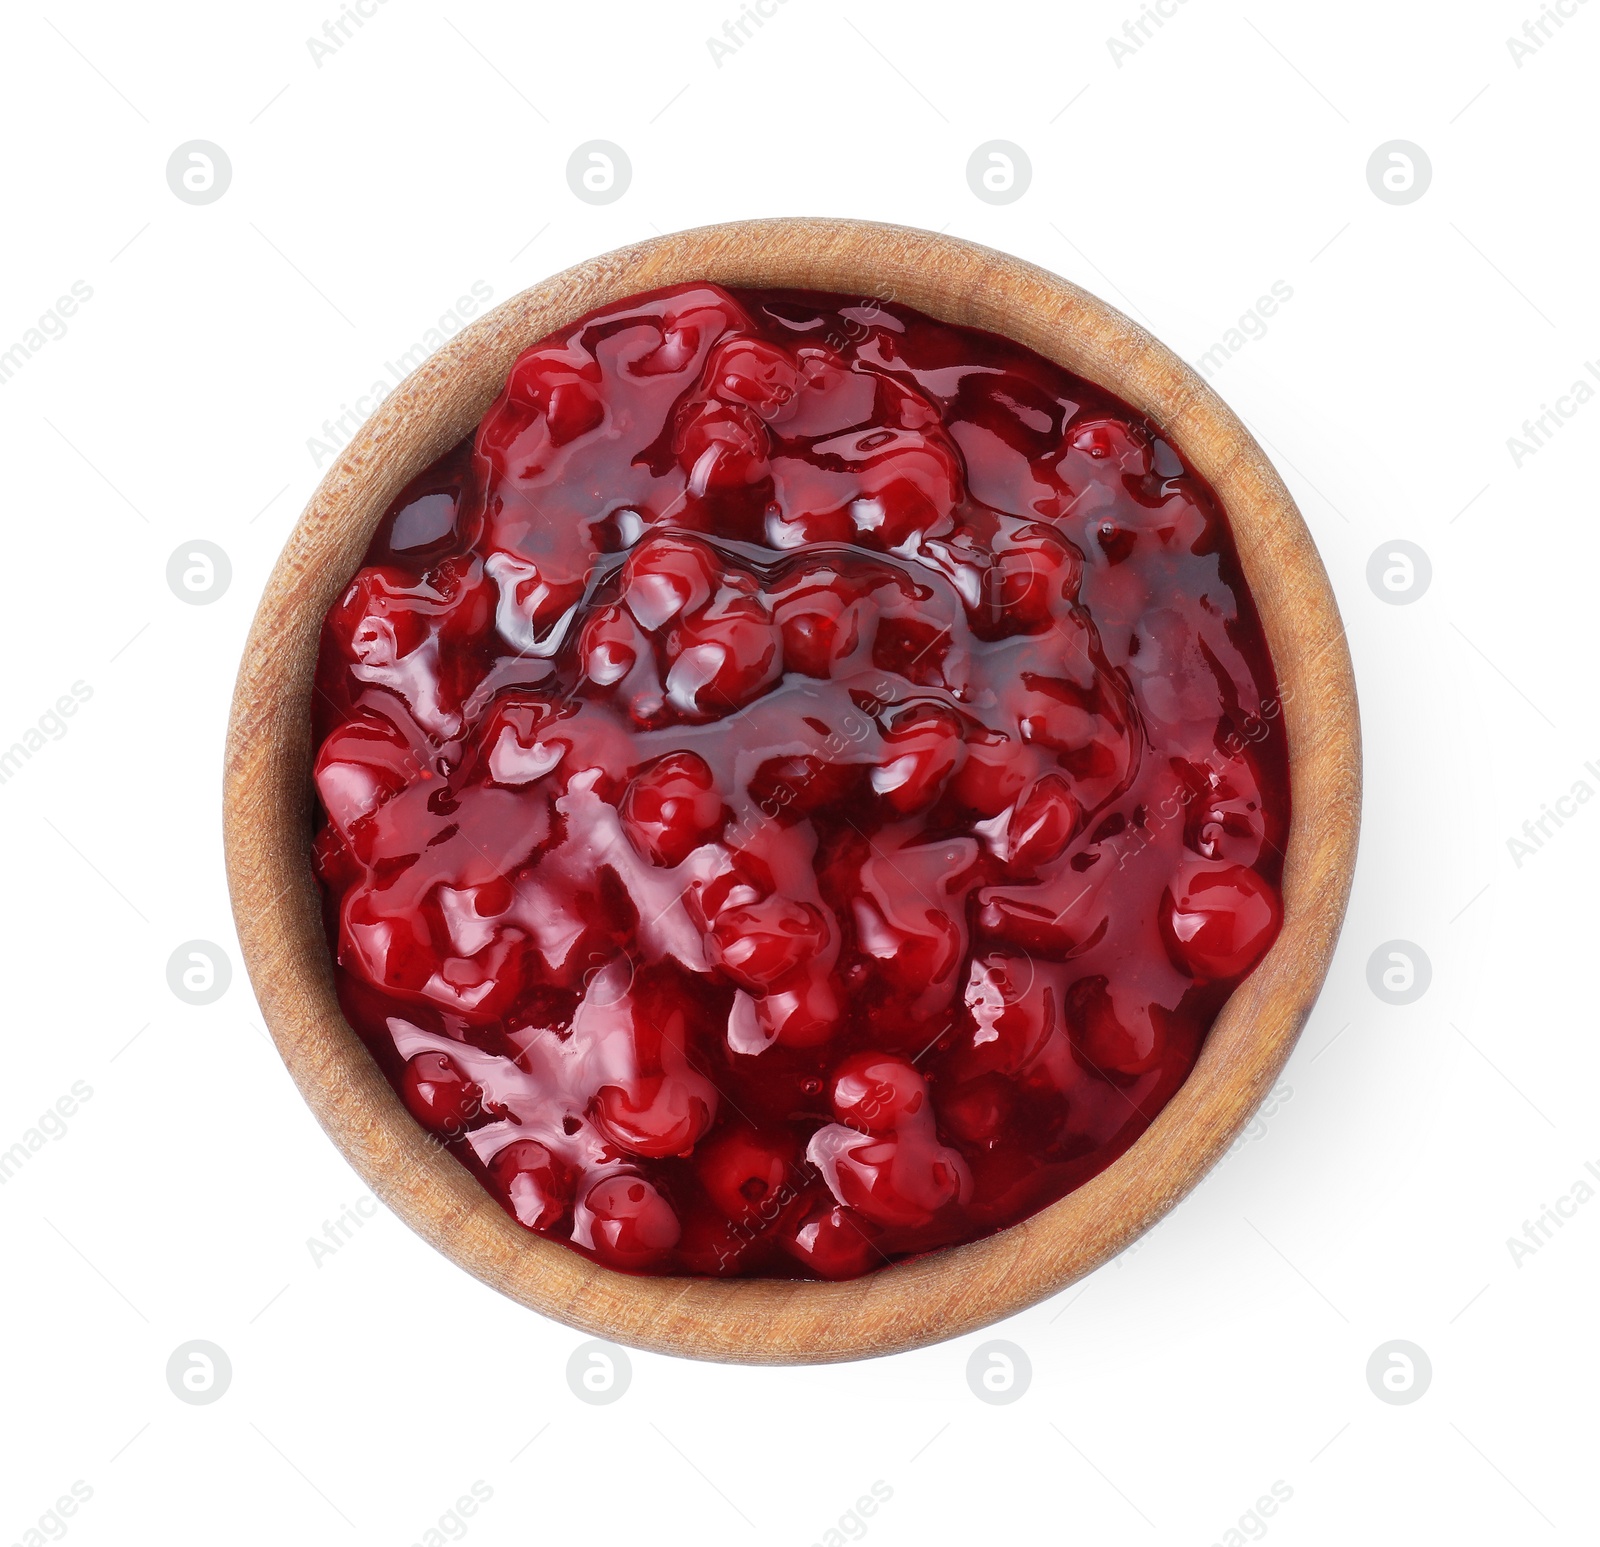 Photo of Fresh cranberry sauce in bowl isolated on white, top view